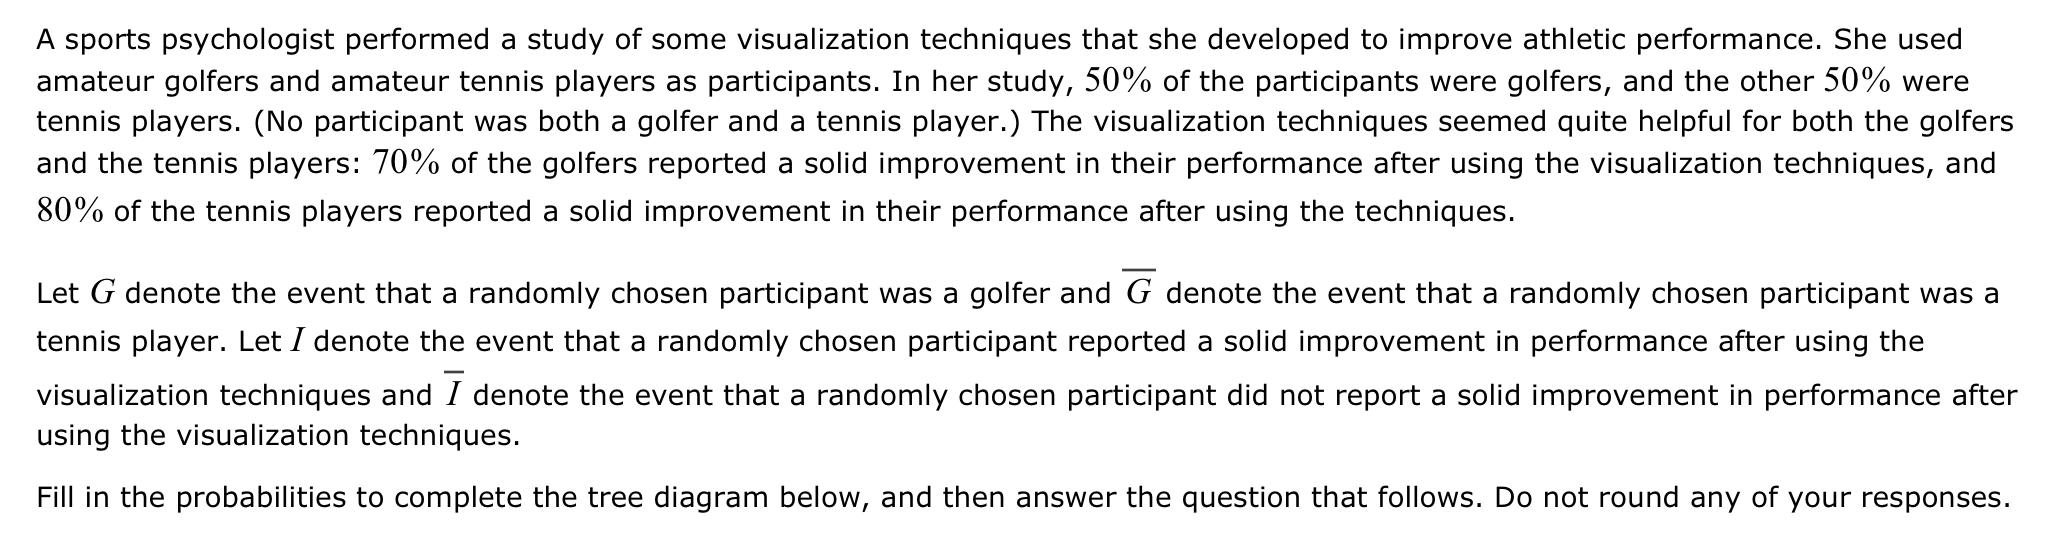 A sports psychologist performed a study of some visualization techniques that she developed to improve